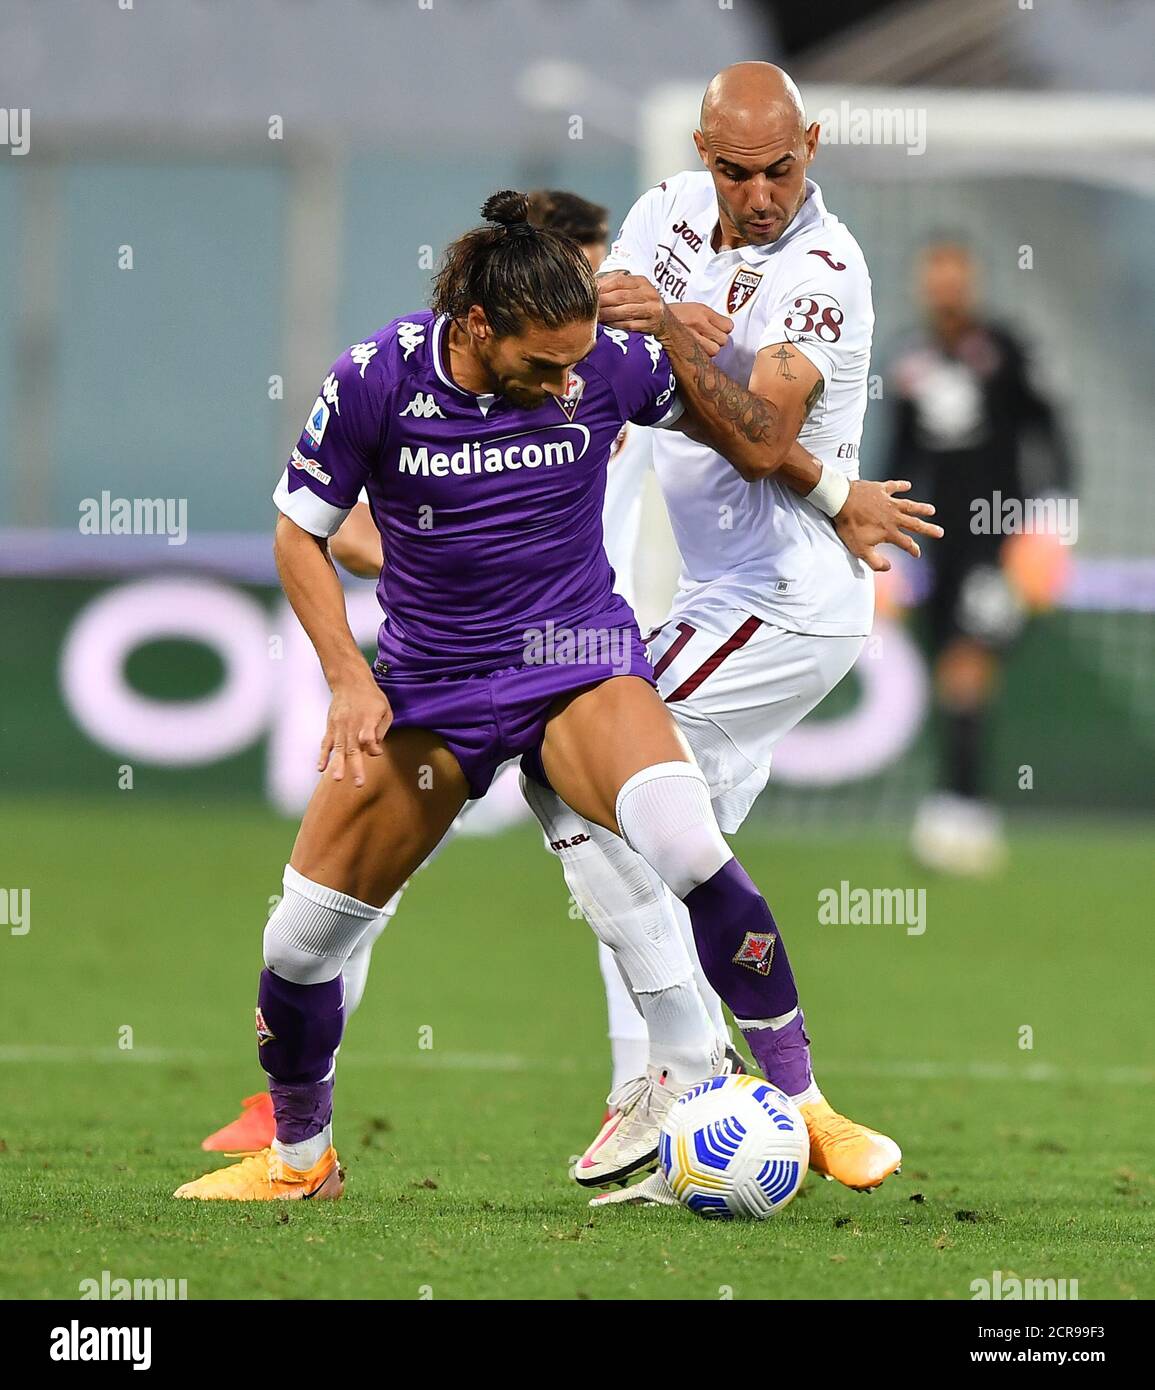 (200920) -- FLORENCE, Sept. 20, 2020 (Xinhua) Fiorentina's Martin Caceres (L) vies with Torino's Simone Zaza during a Serie A soccer match between Fiorentina and Torino in Florence, Italy, Sept. 19, 2020. (Xinhua) Stock Photo